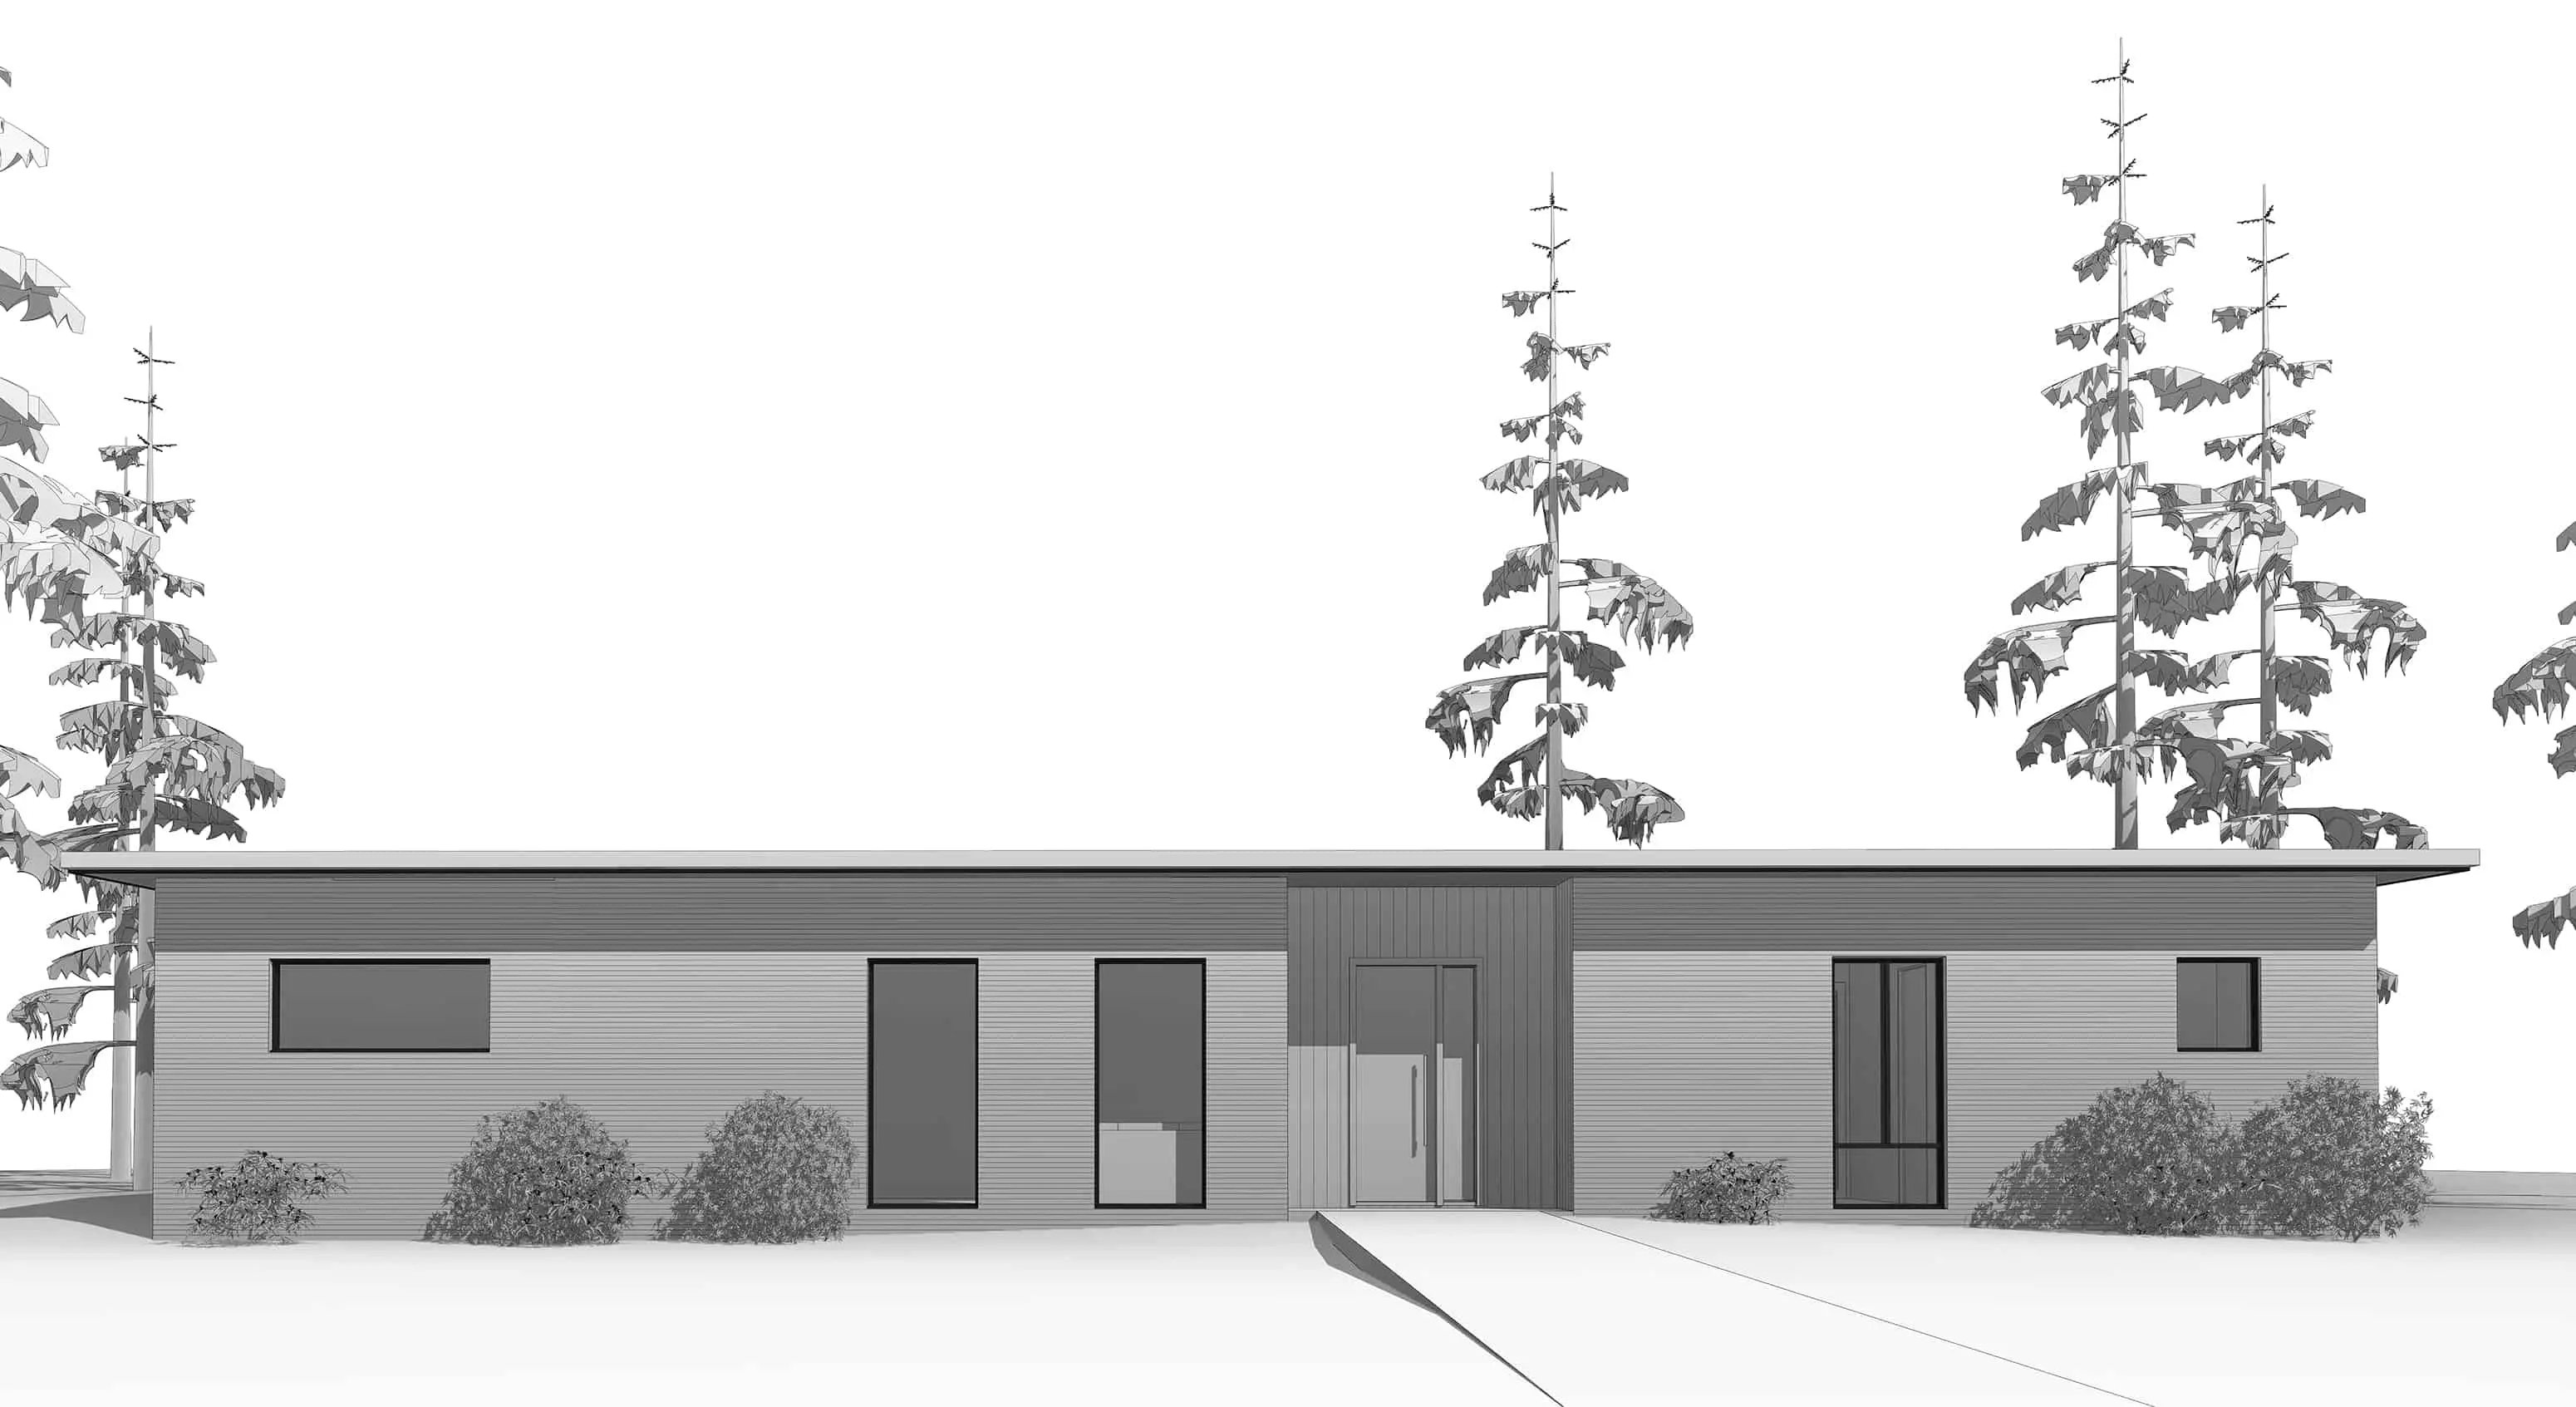 Dvele Sollys modern prefab home elevation drawing of front of home.